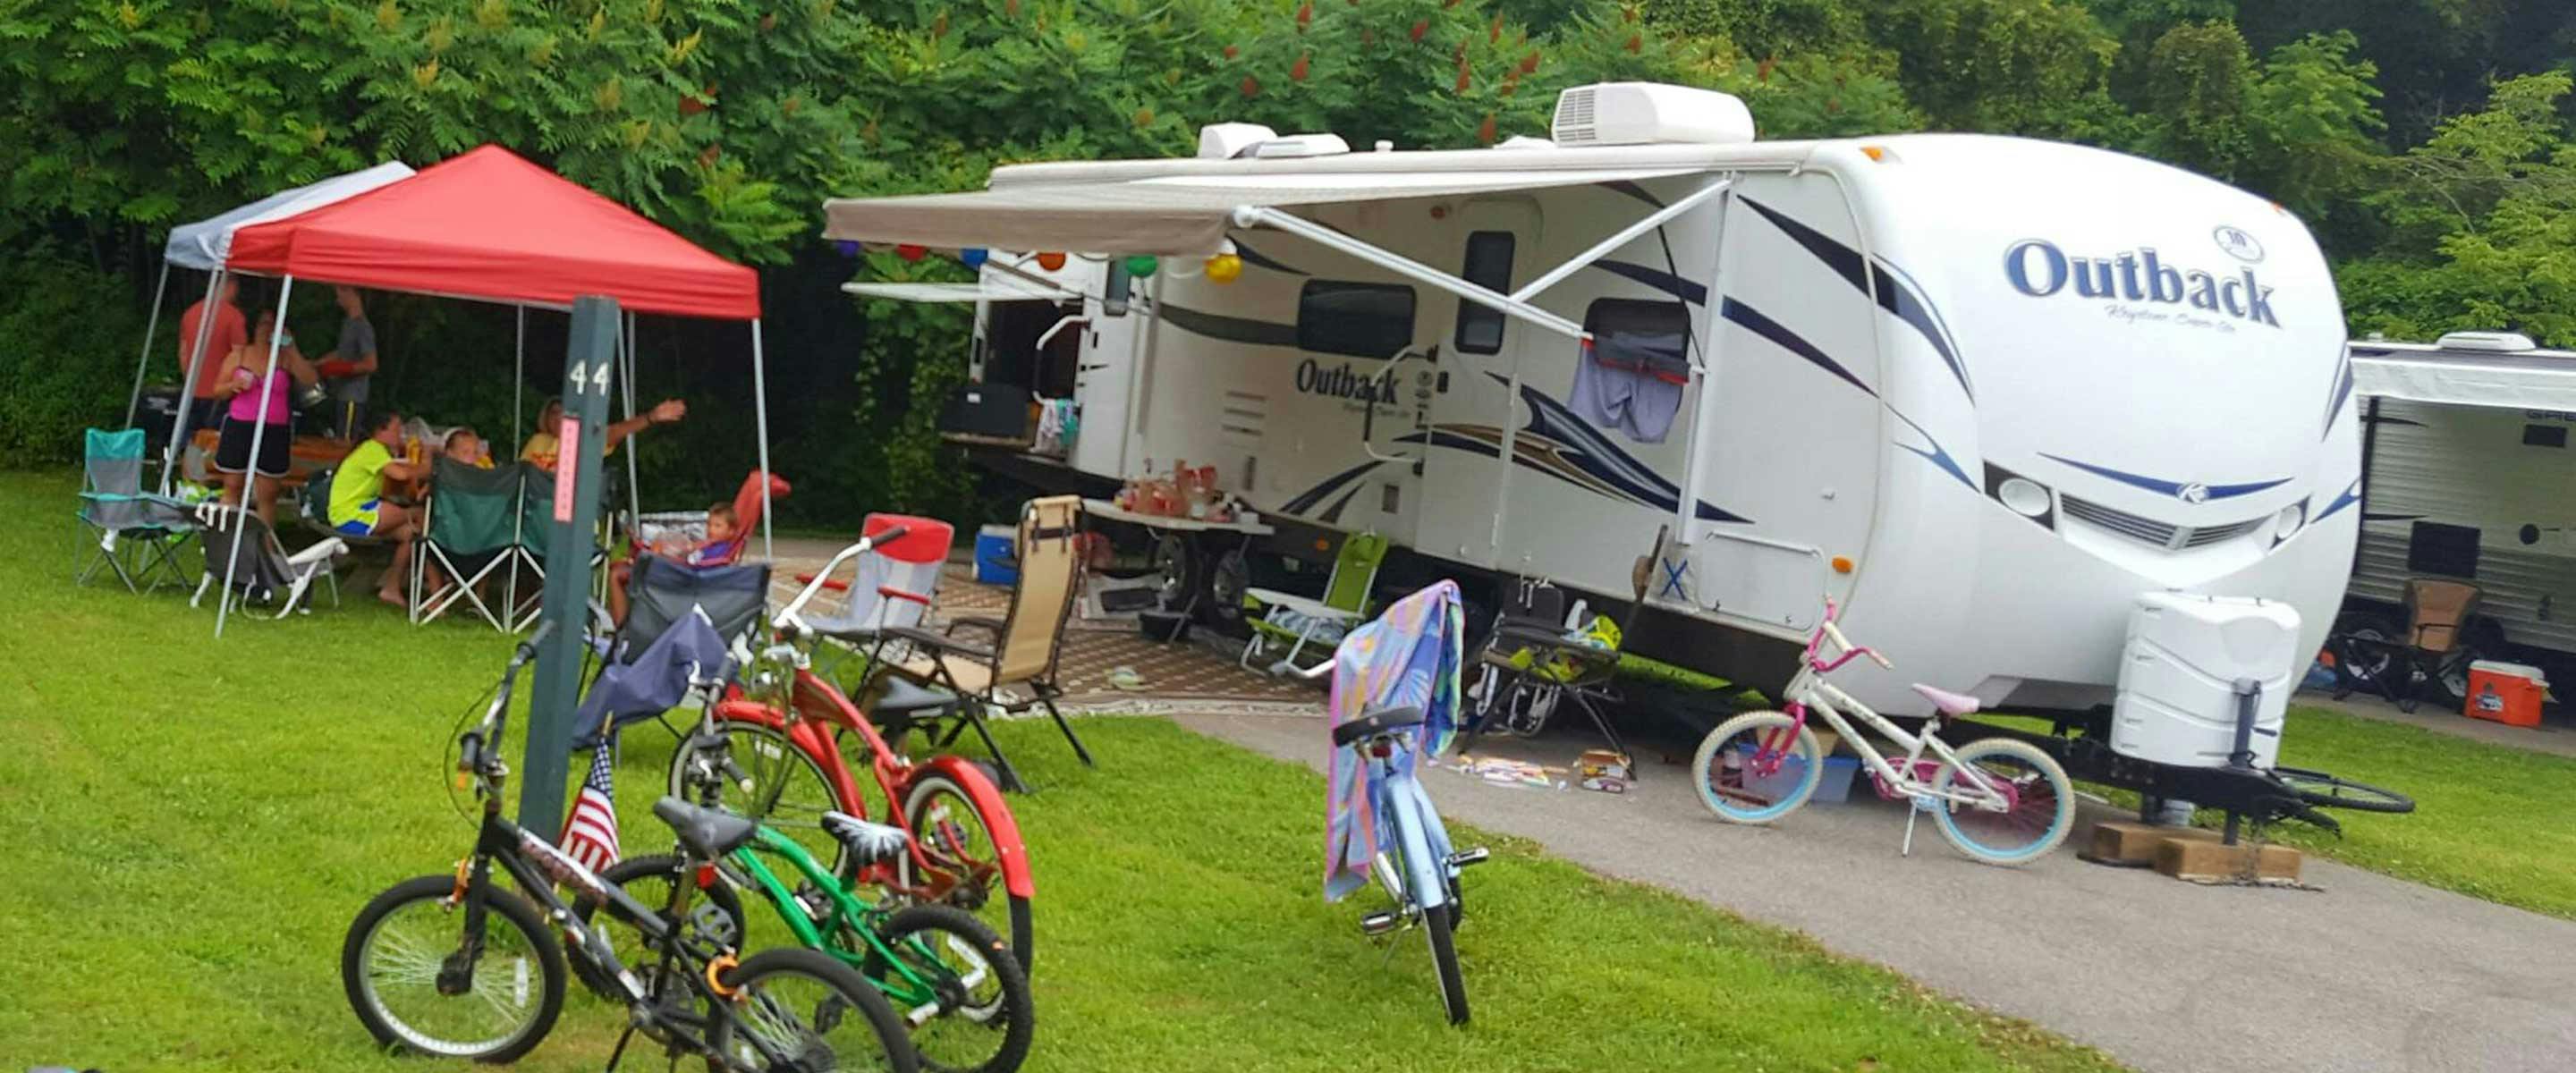 group of people brought kids bikes to campground